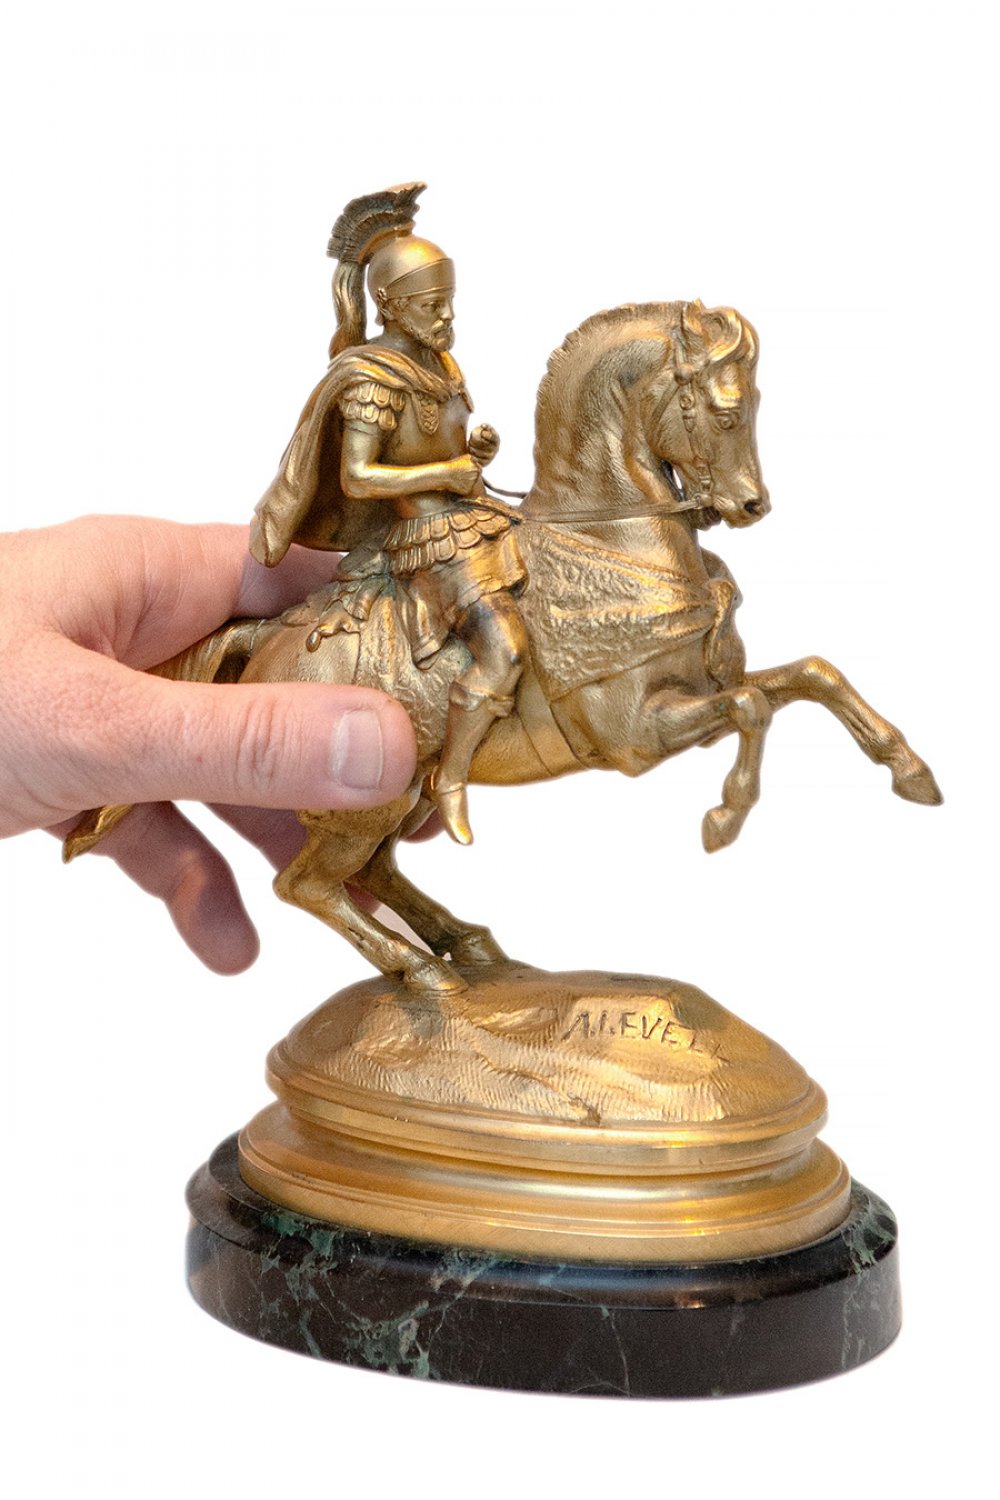 Equestrian sculpture, late 19th century.Gilded bronze.Signed by A. Leveel.Size: 22 x 20 x 9 cm; 24 x - Image 5 of 5